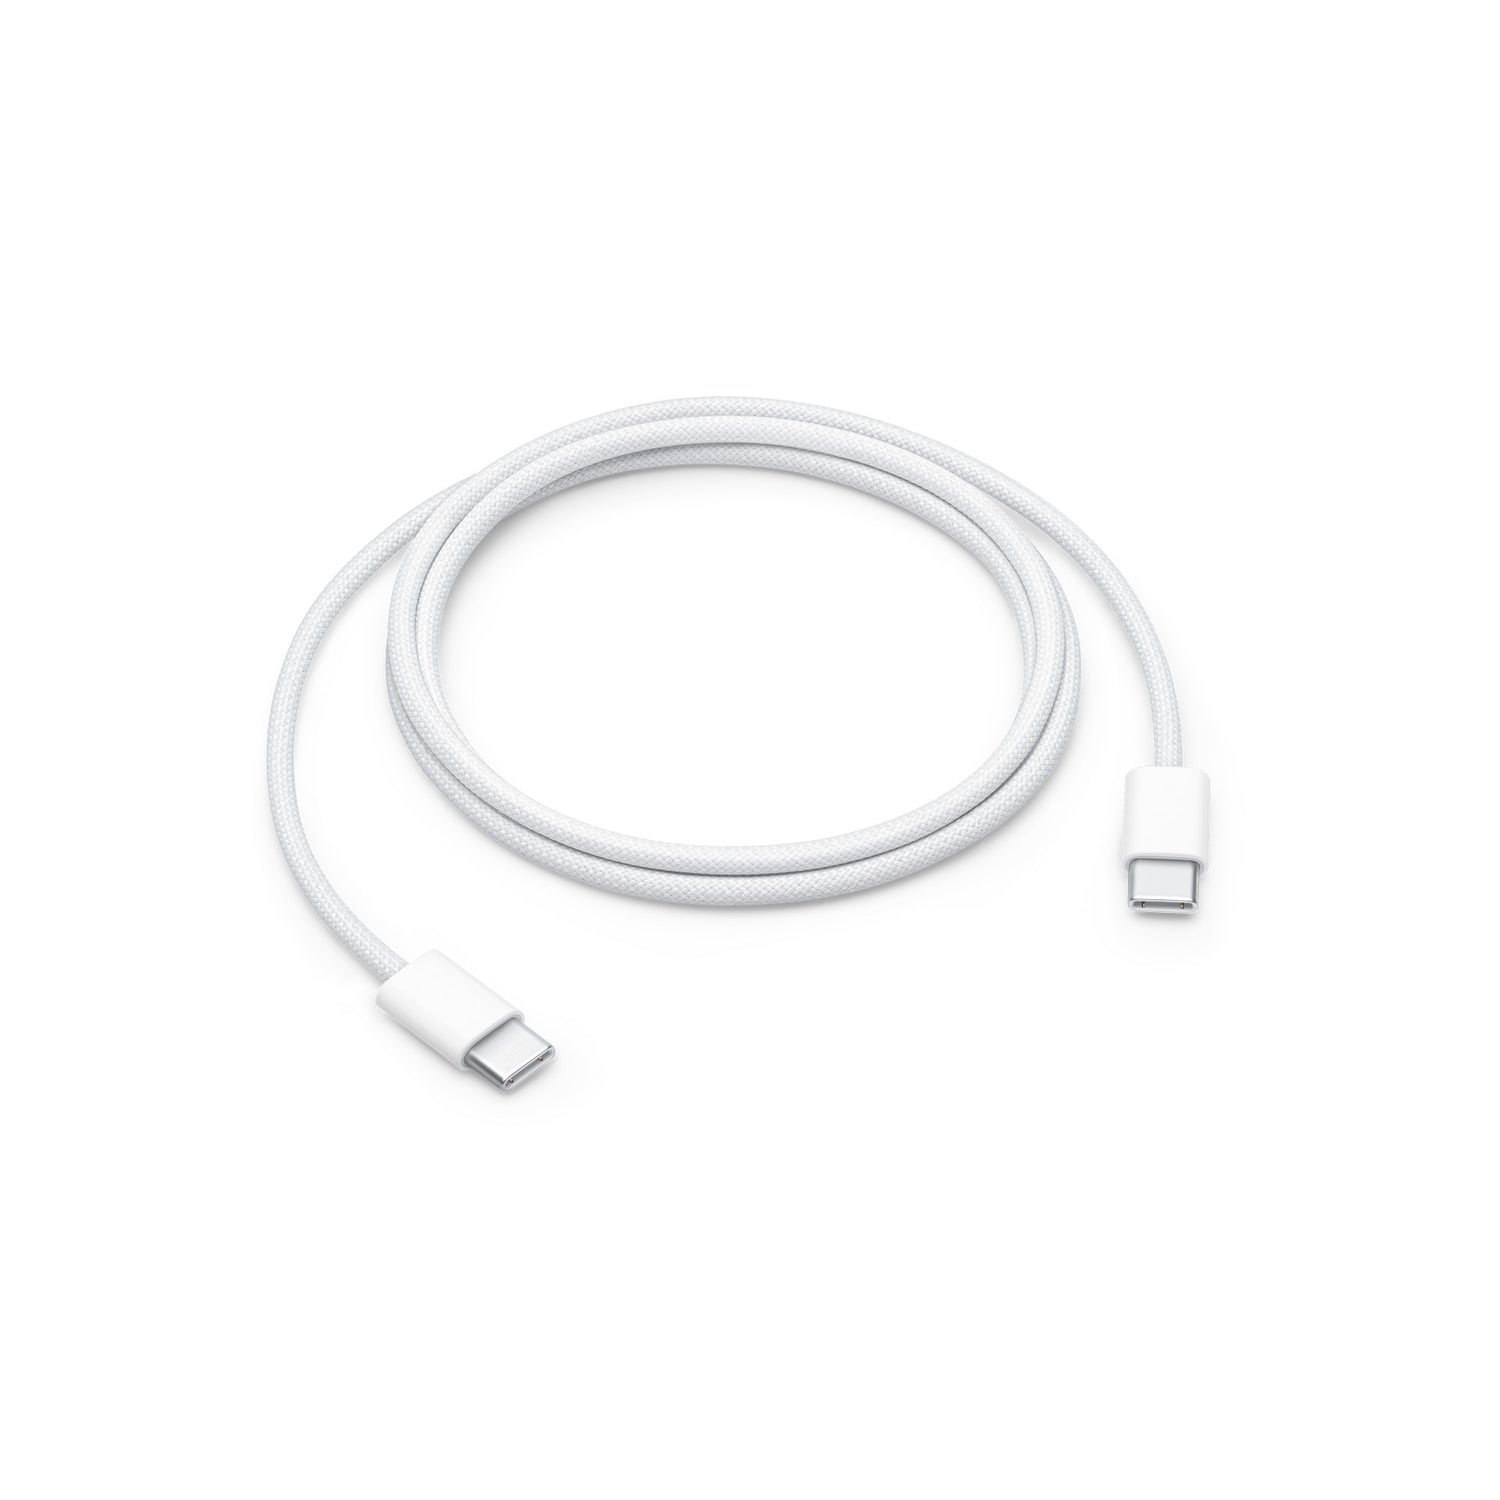 apl_ps_USB-C Woven Charge Cable (1m)